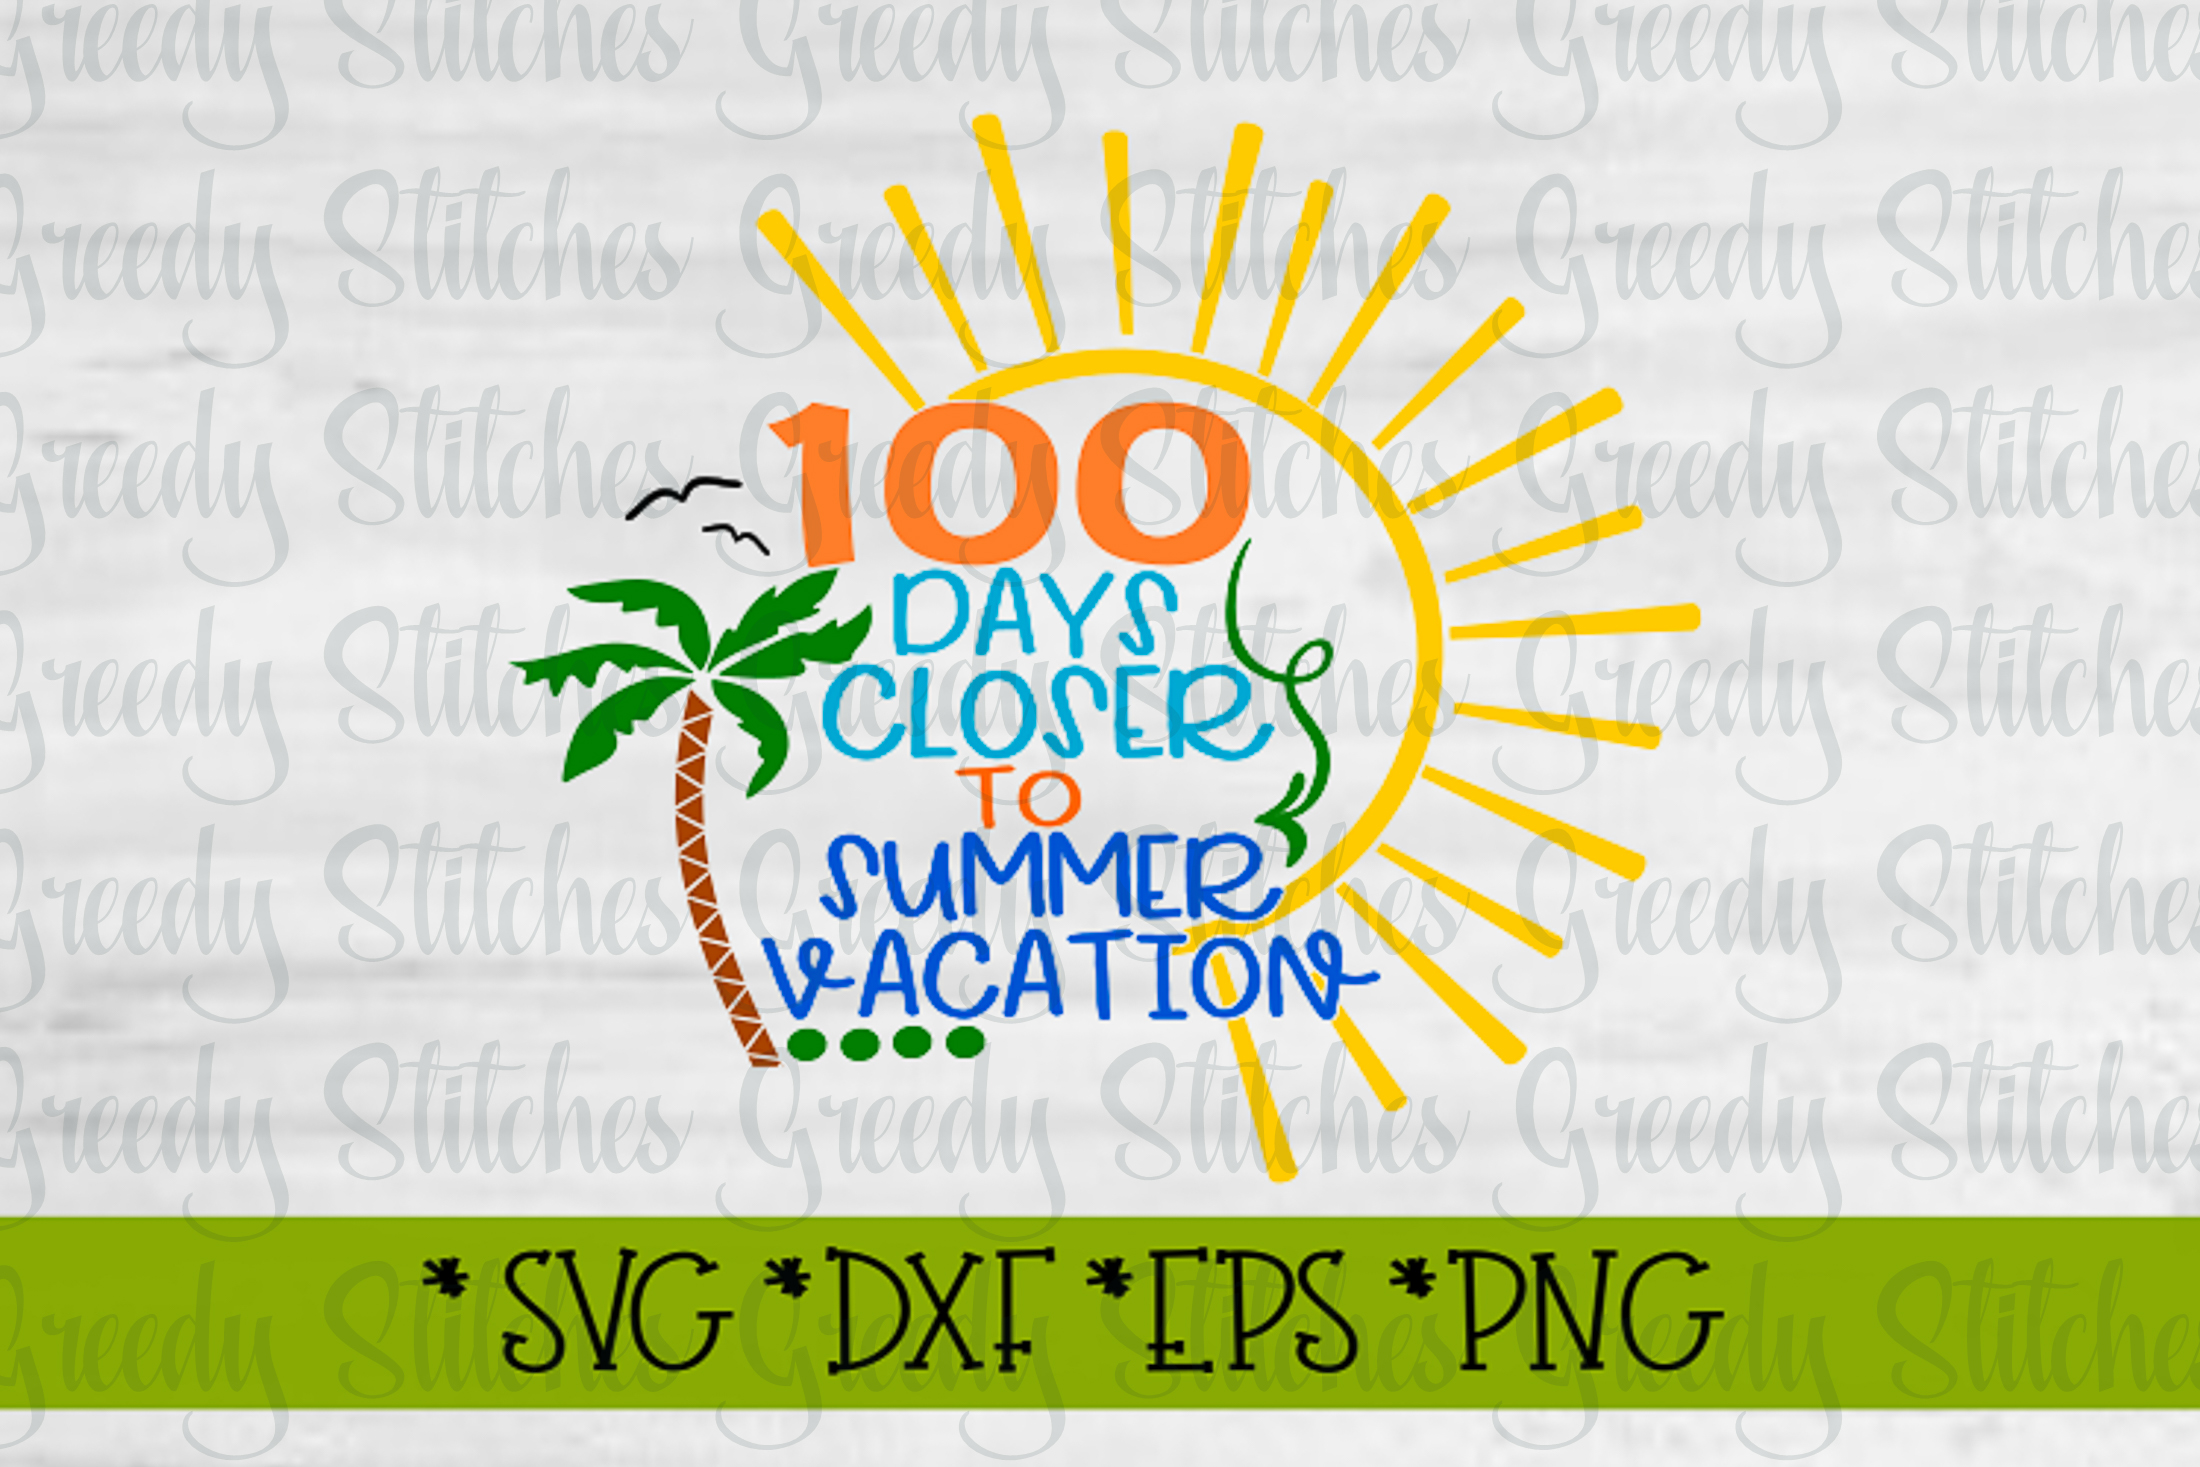 Download 100 Days Closer To Summer Vacation SVG, DXF, EPS, PNG.